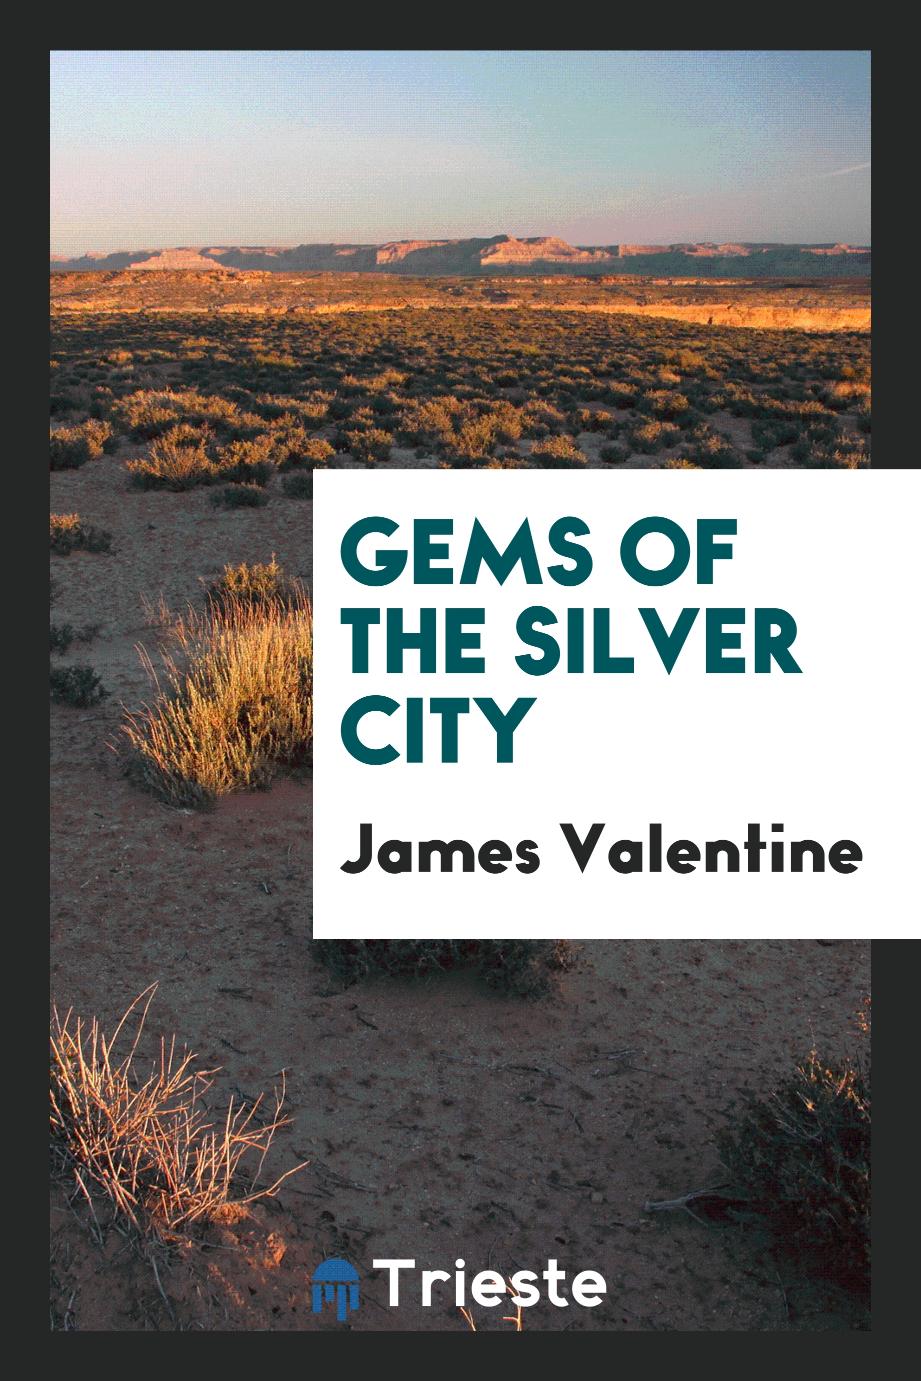 Gems of the silver city